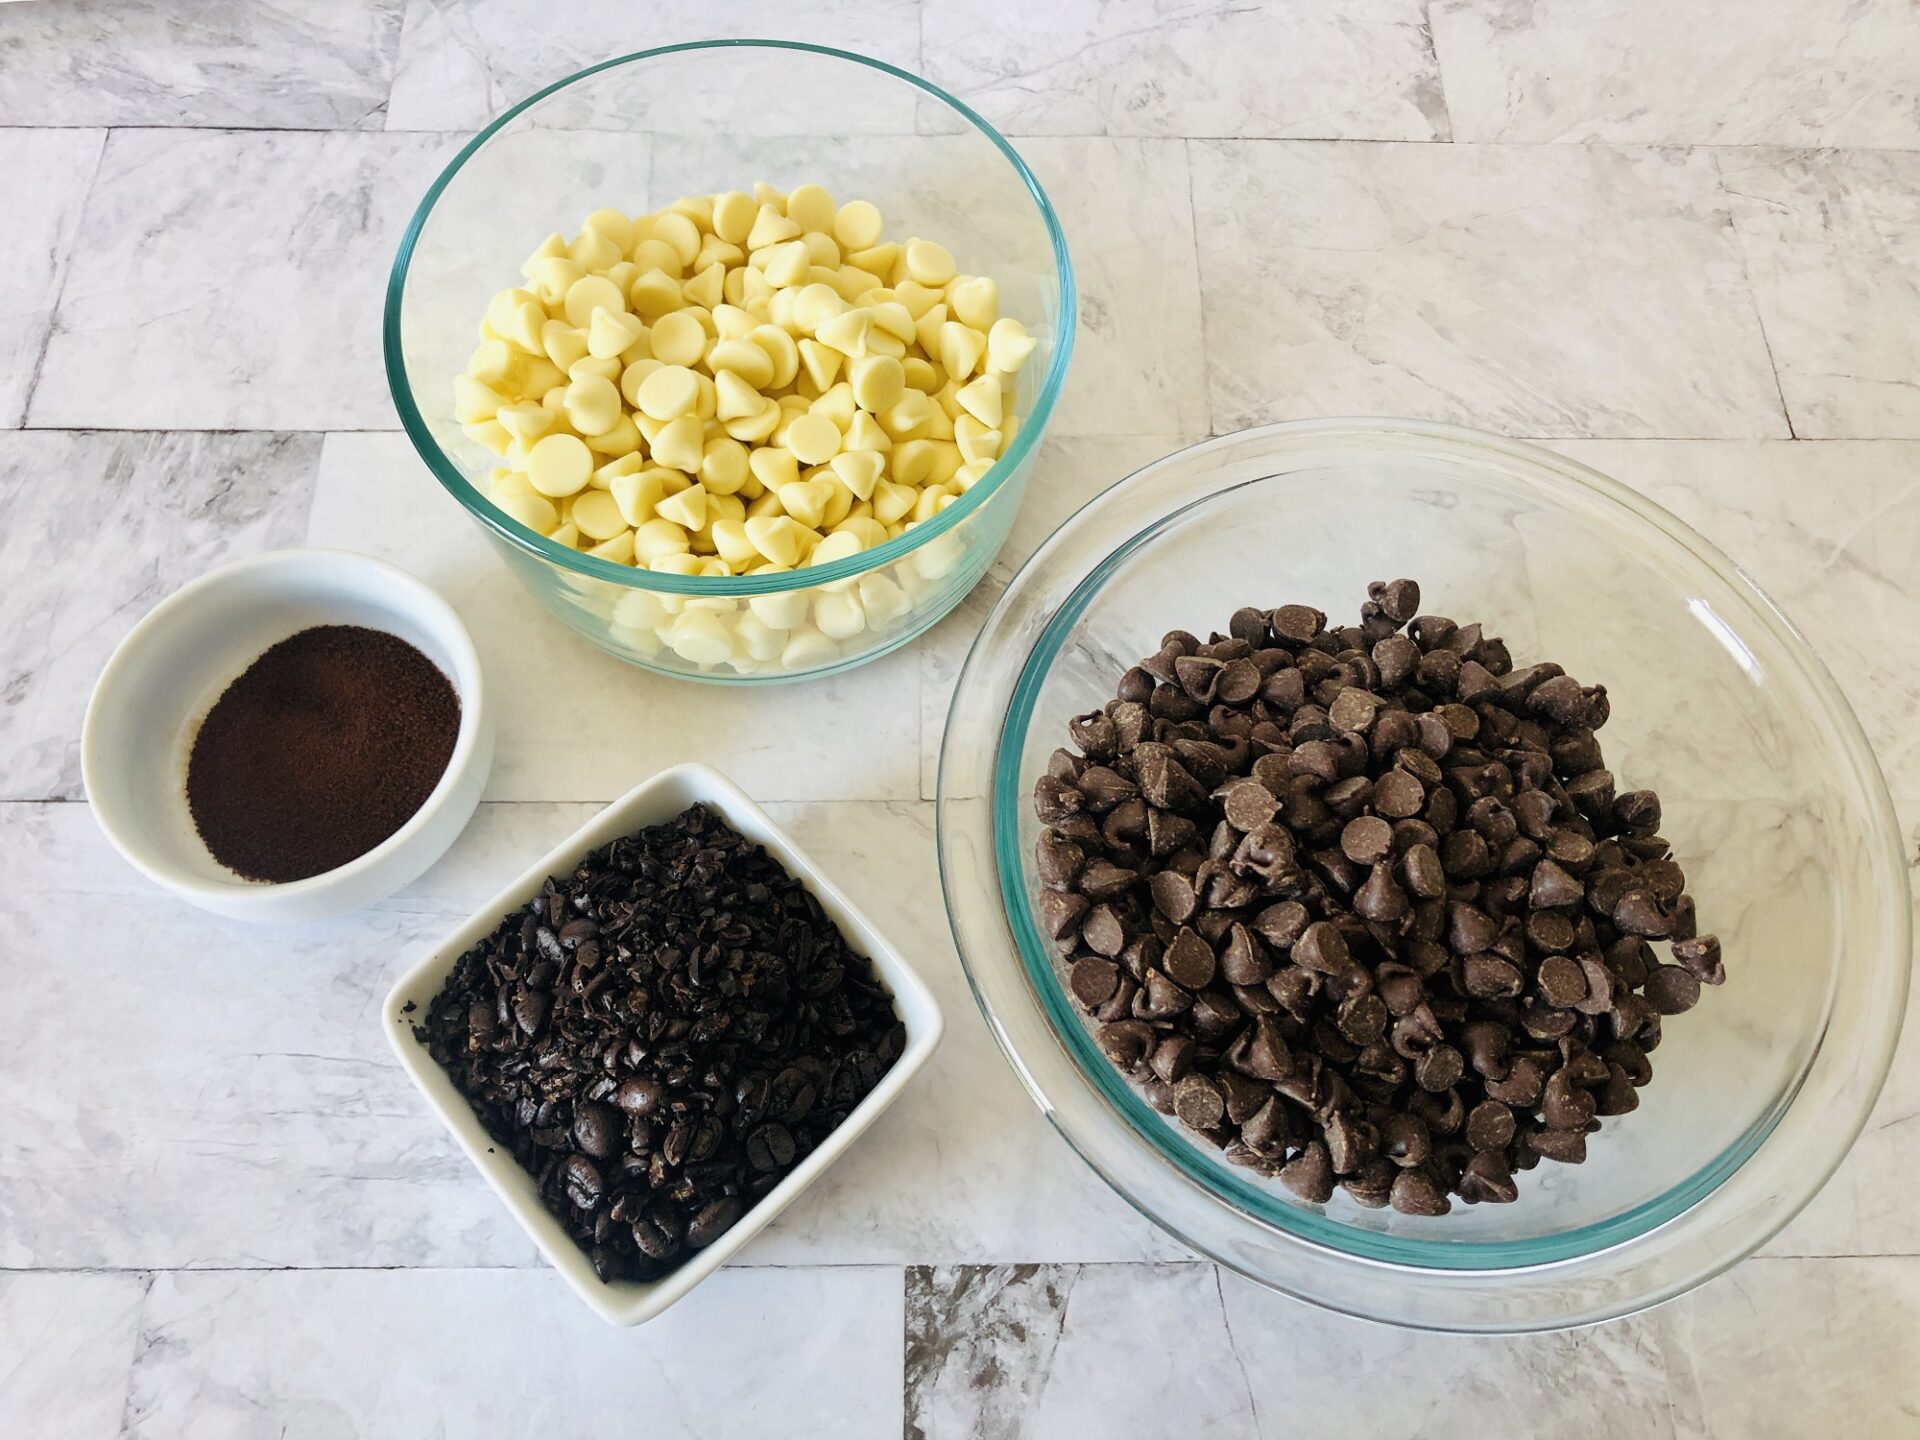 Ingredients for white chocolate bark on a counter.